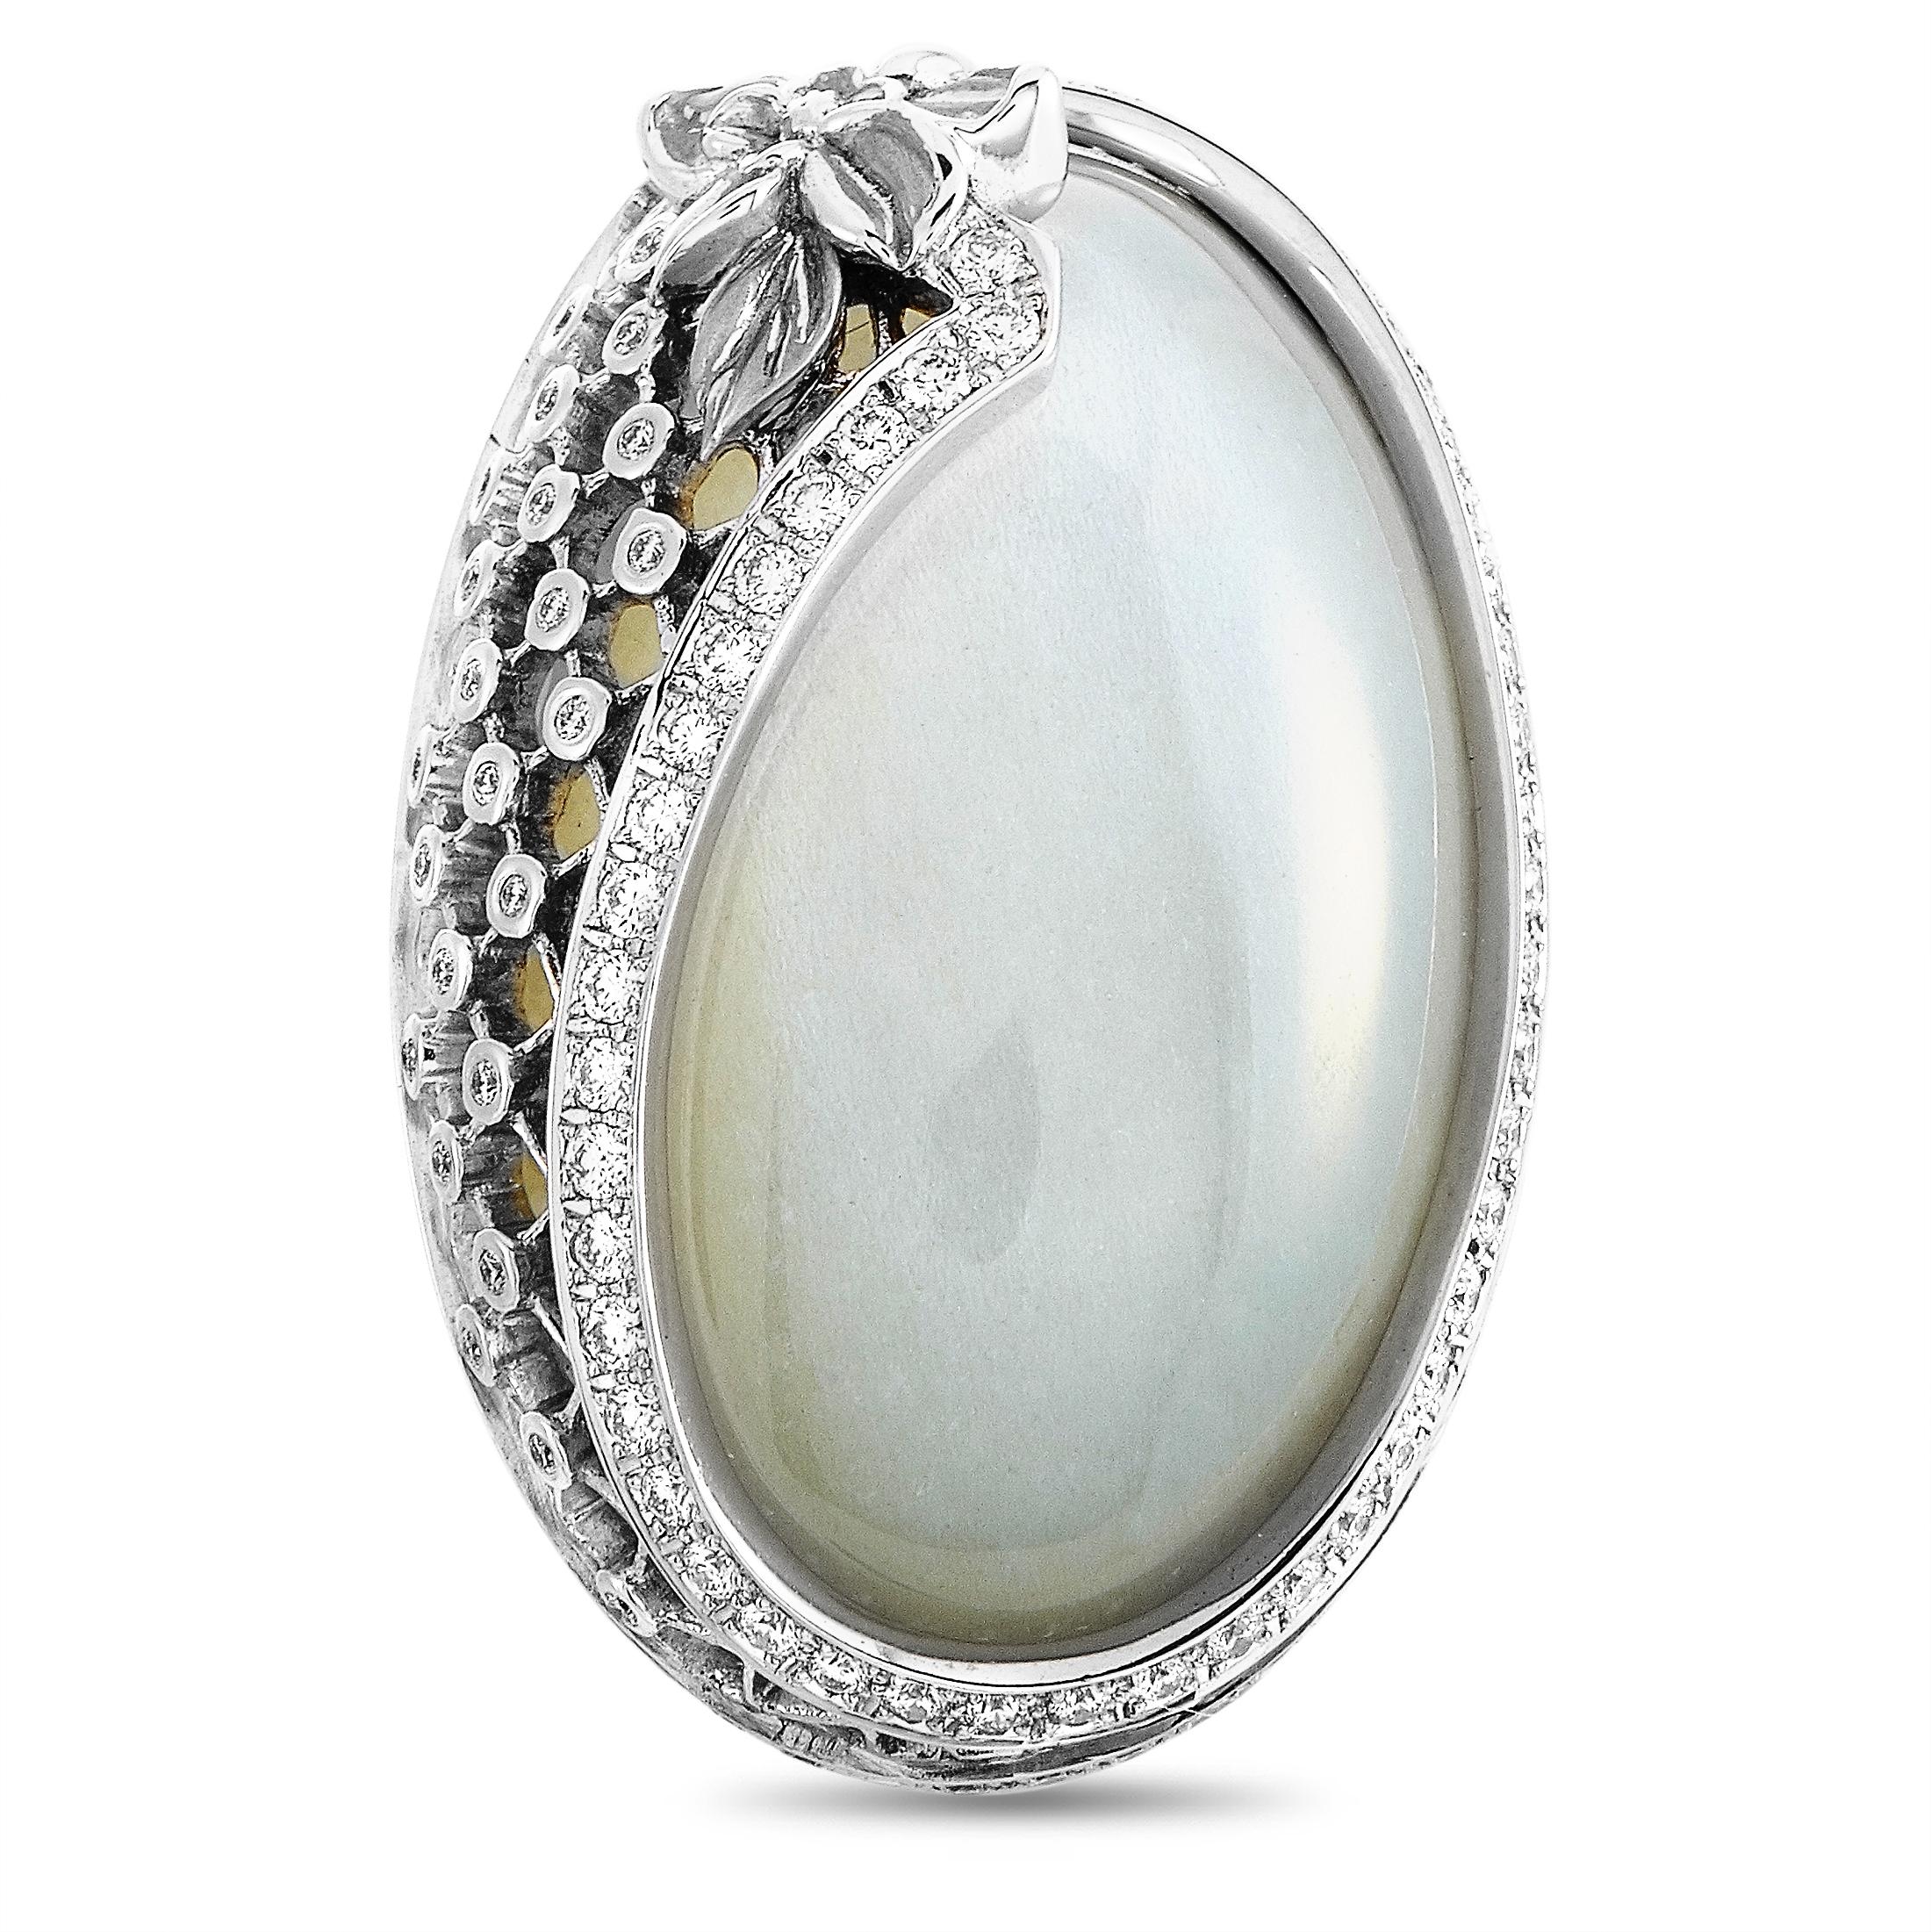 Women's Carrera y Carrera Sierpes Maxi 18K White Gold 1.65 Ct Diamond and Moonstone Ring